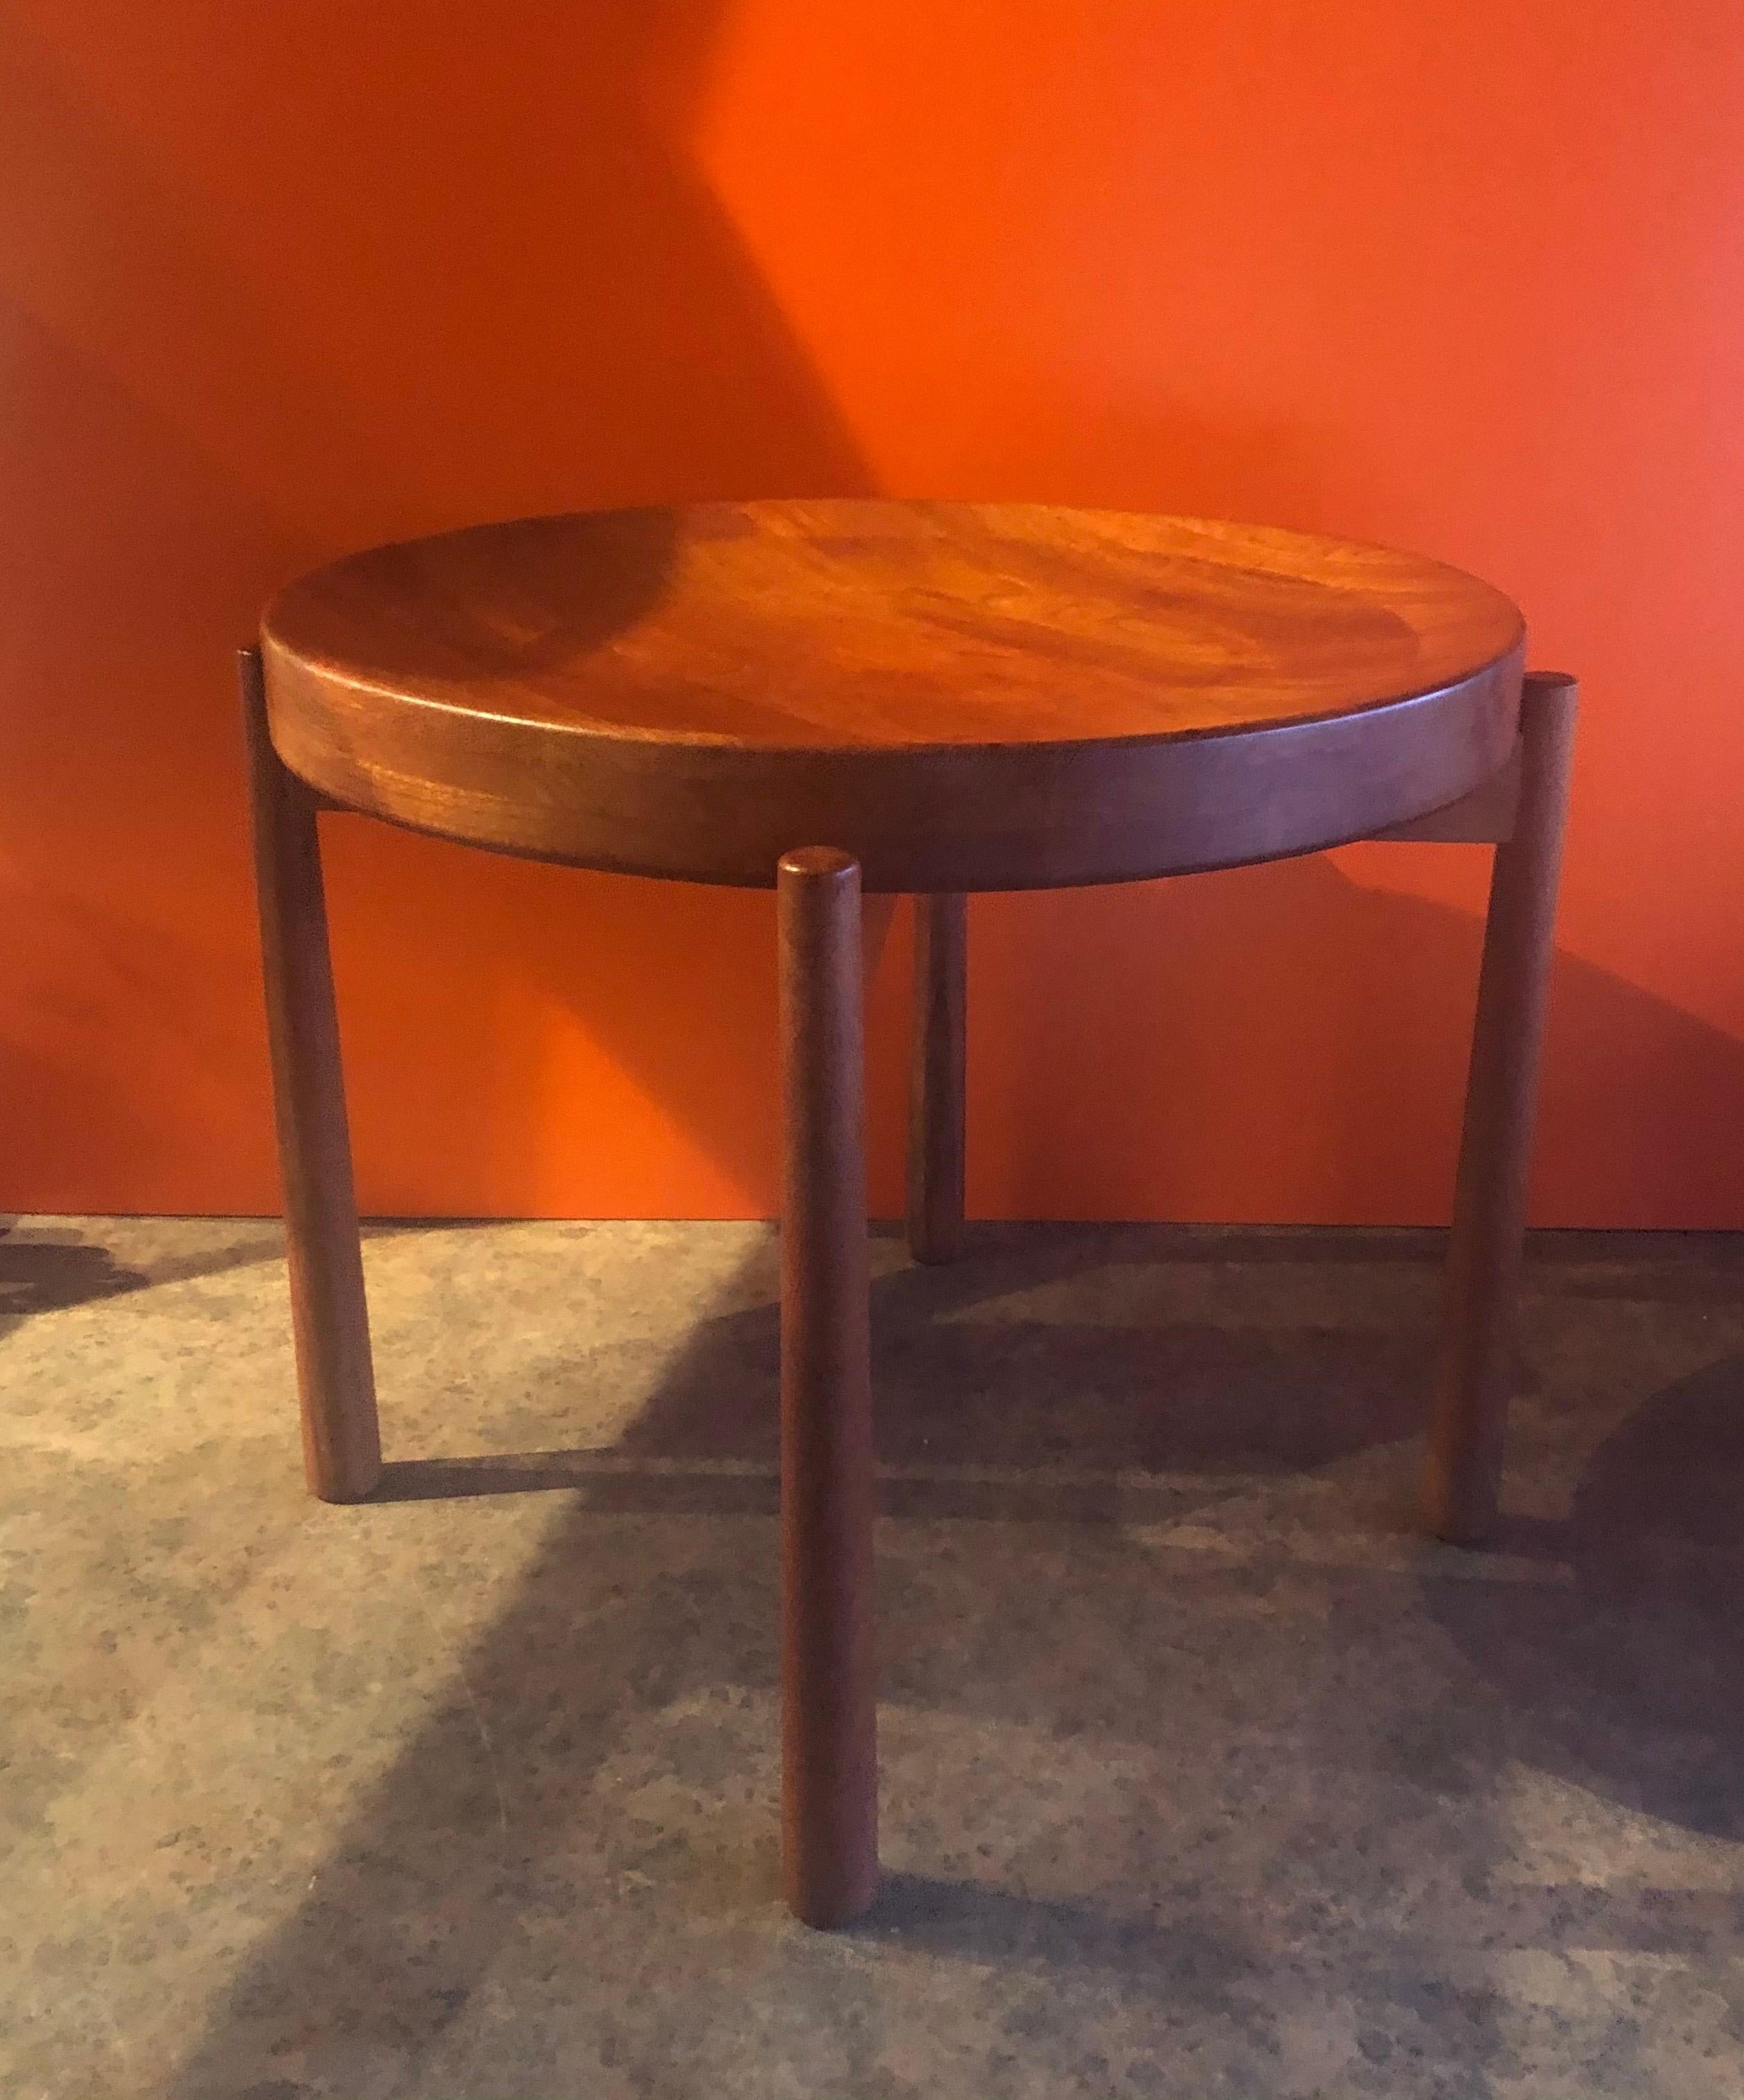 Mid-Century Modern Side Table or Fruit Bowl Attributed to Jens Harald Quistgaard for DUX of Sweden For Sale